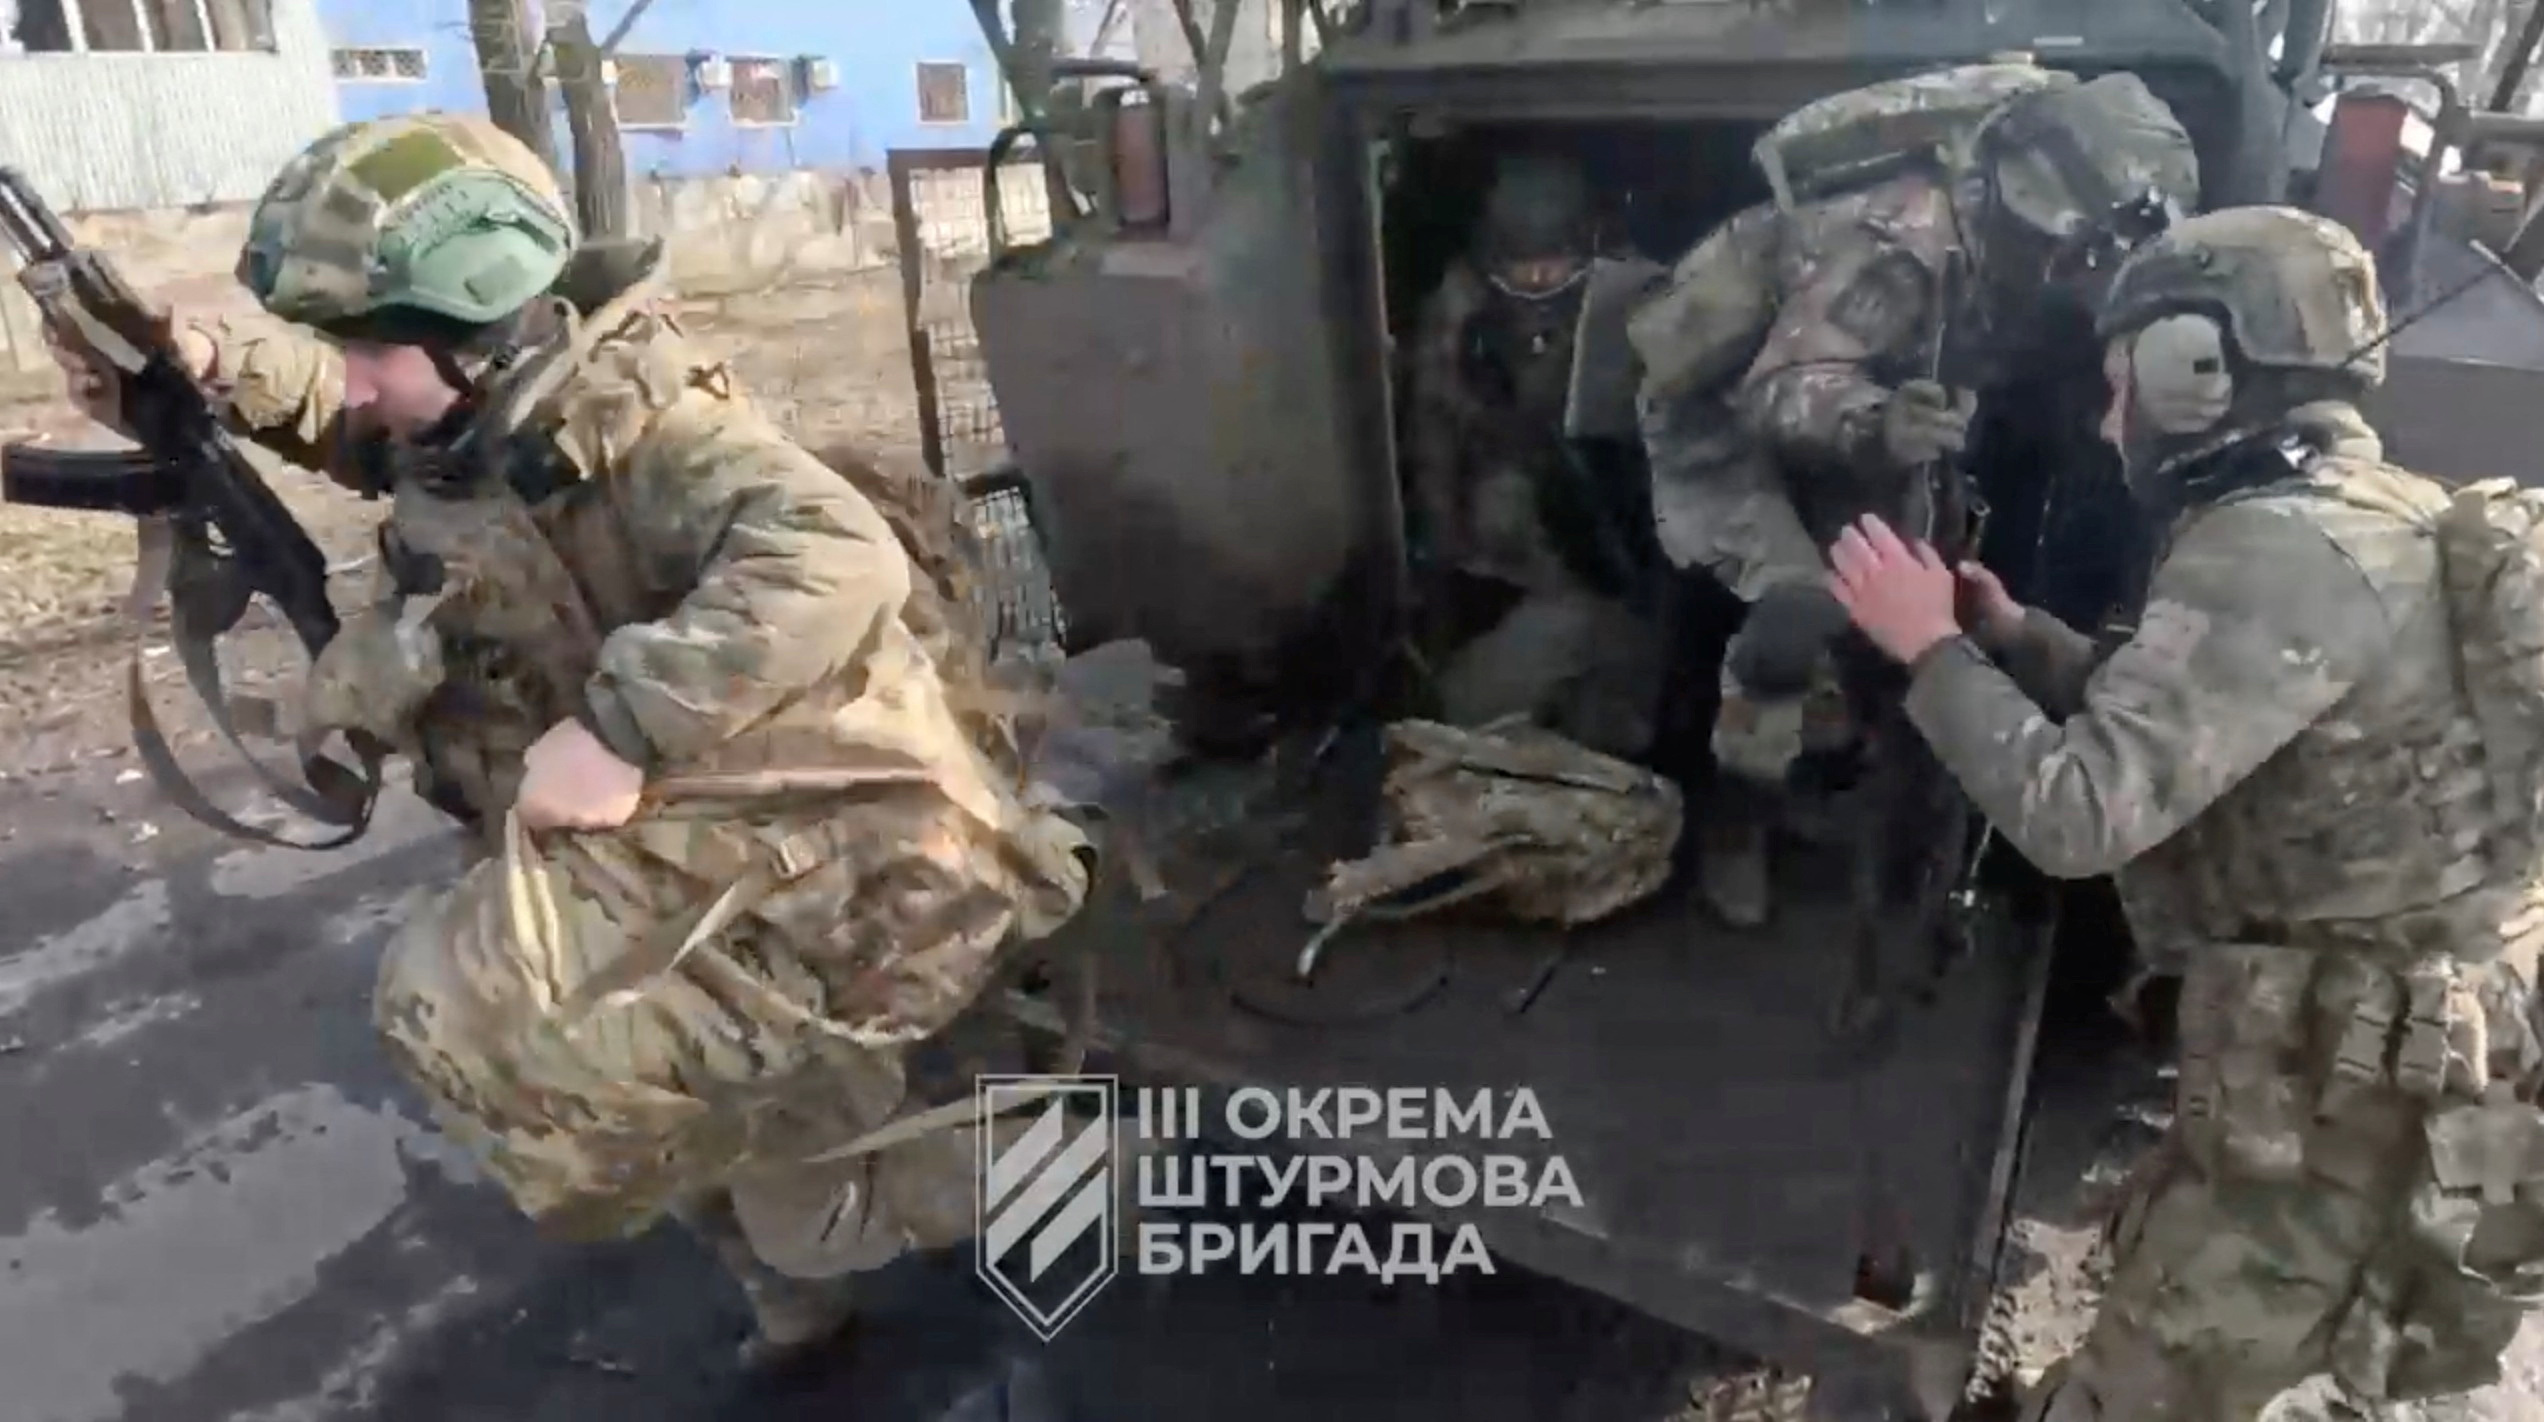 Ukrainian soldiers get out of a military vehicle in a location given as Avdiivka, Donetsk Region